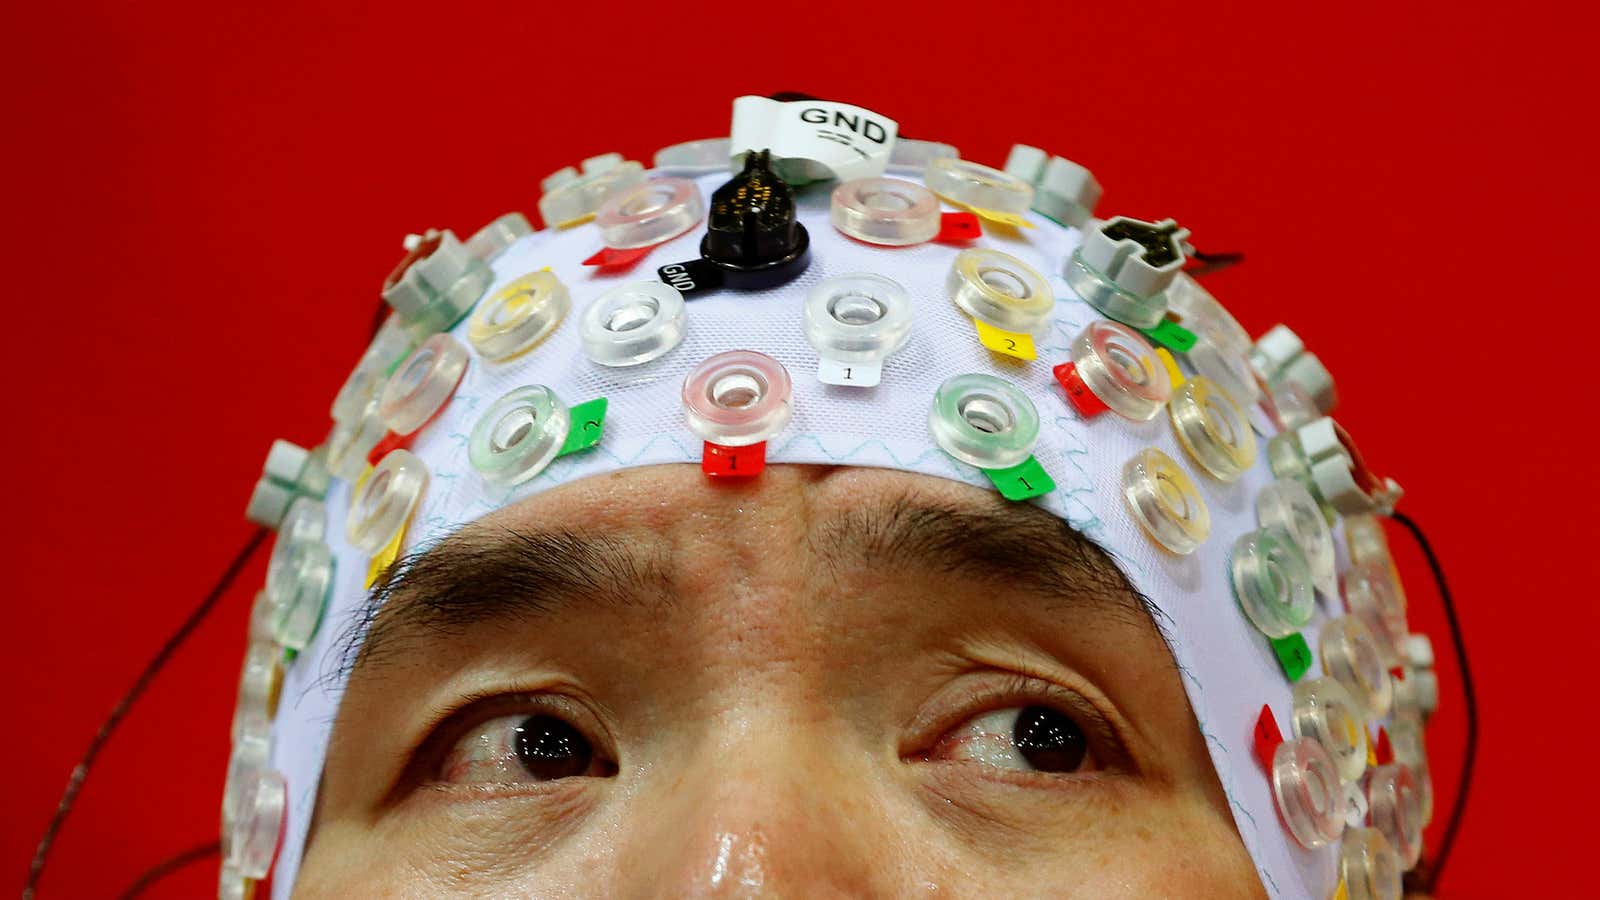 Doctors want to insert electrodes into brains so humans can communicate directly with computers and each other.